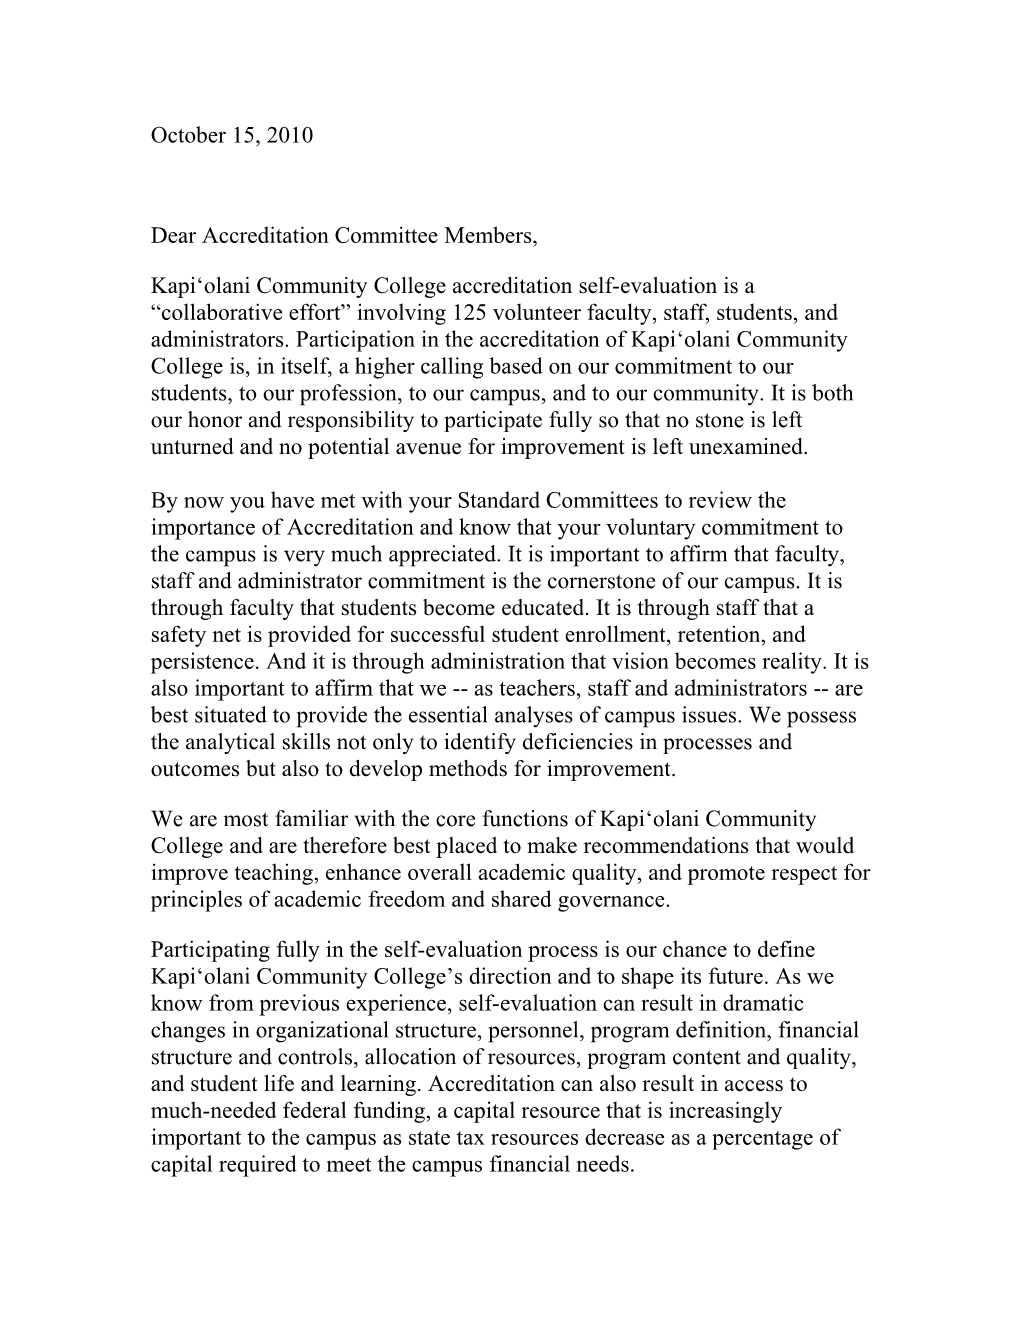 Institutional Accreditation a Call for Greater Faculty Involvement (2008)